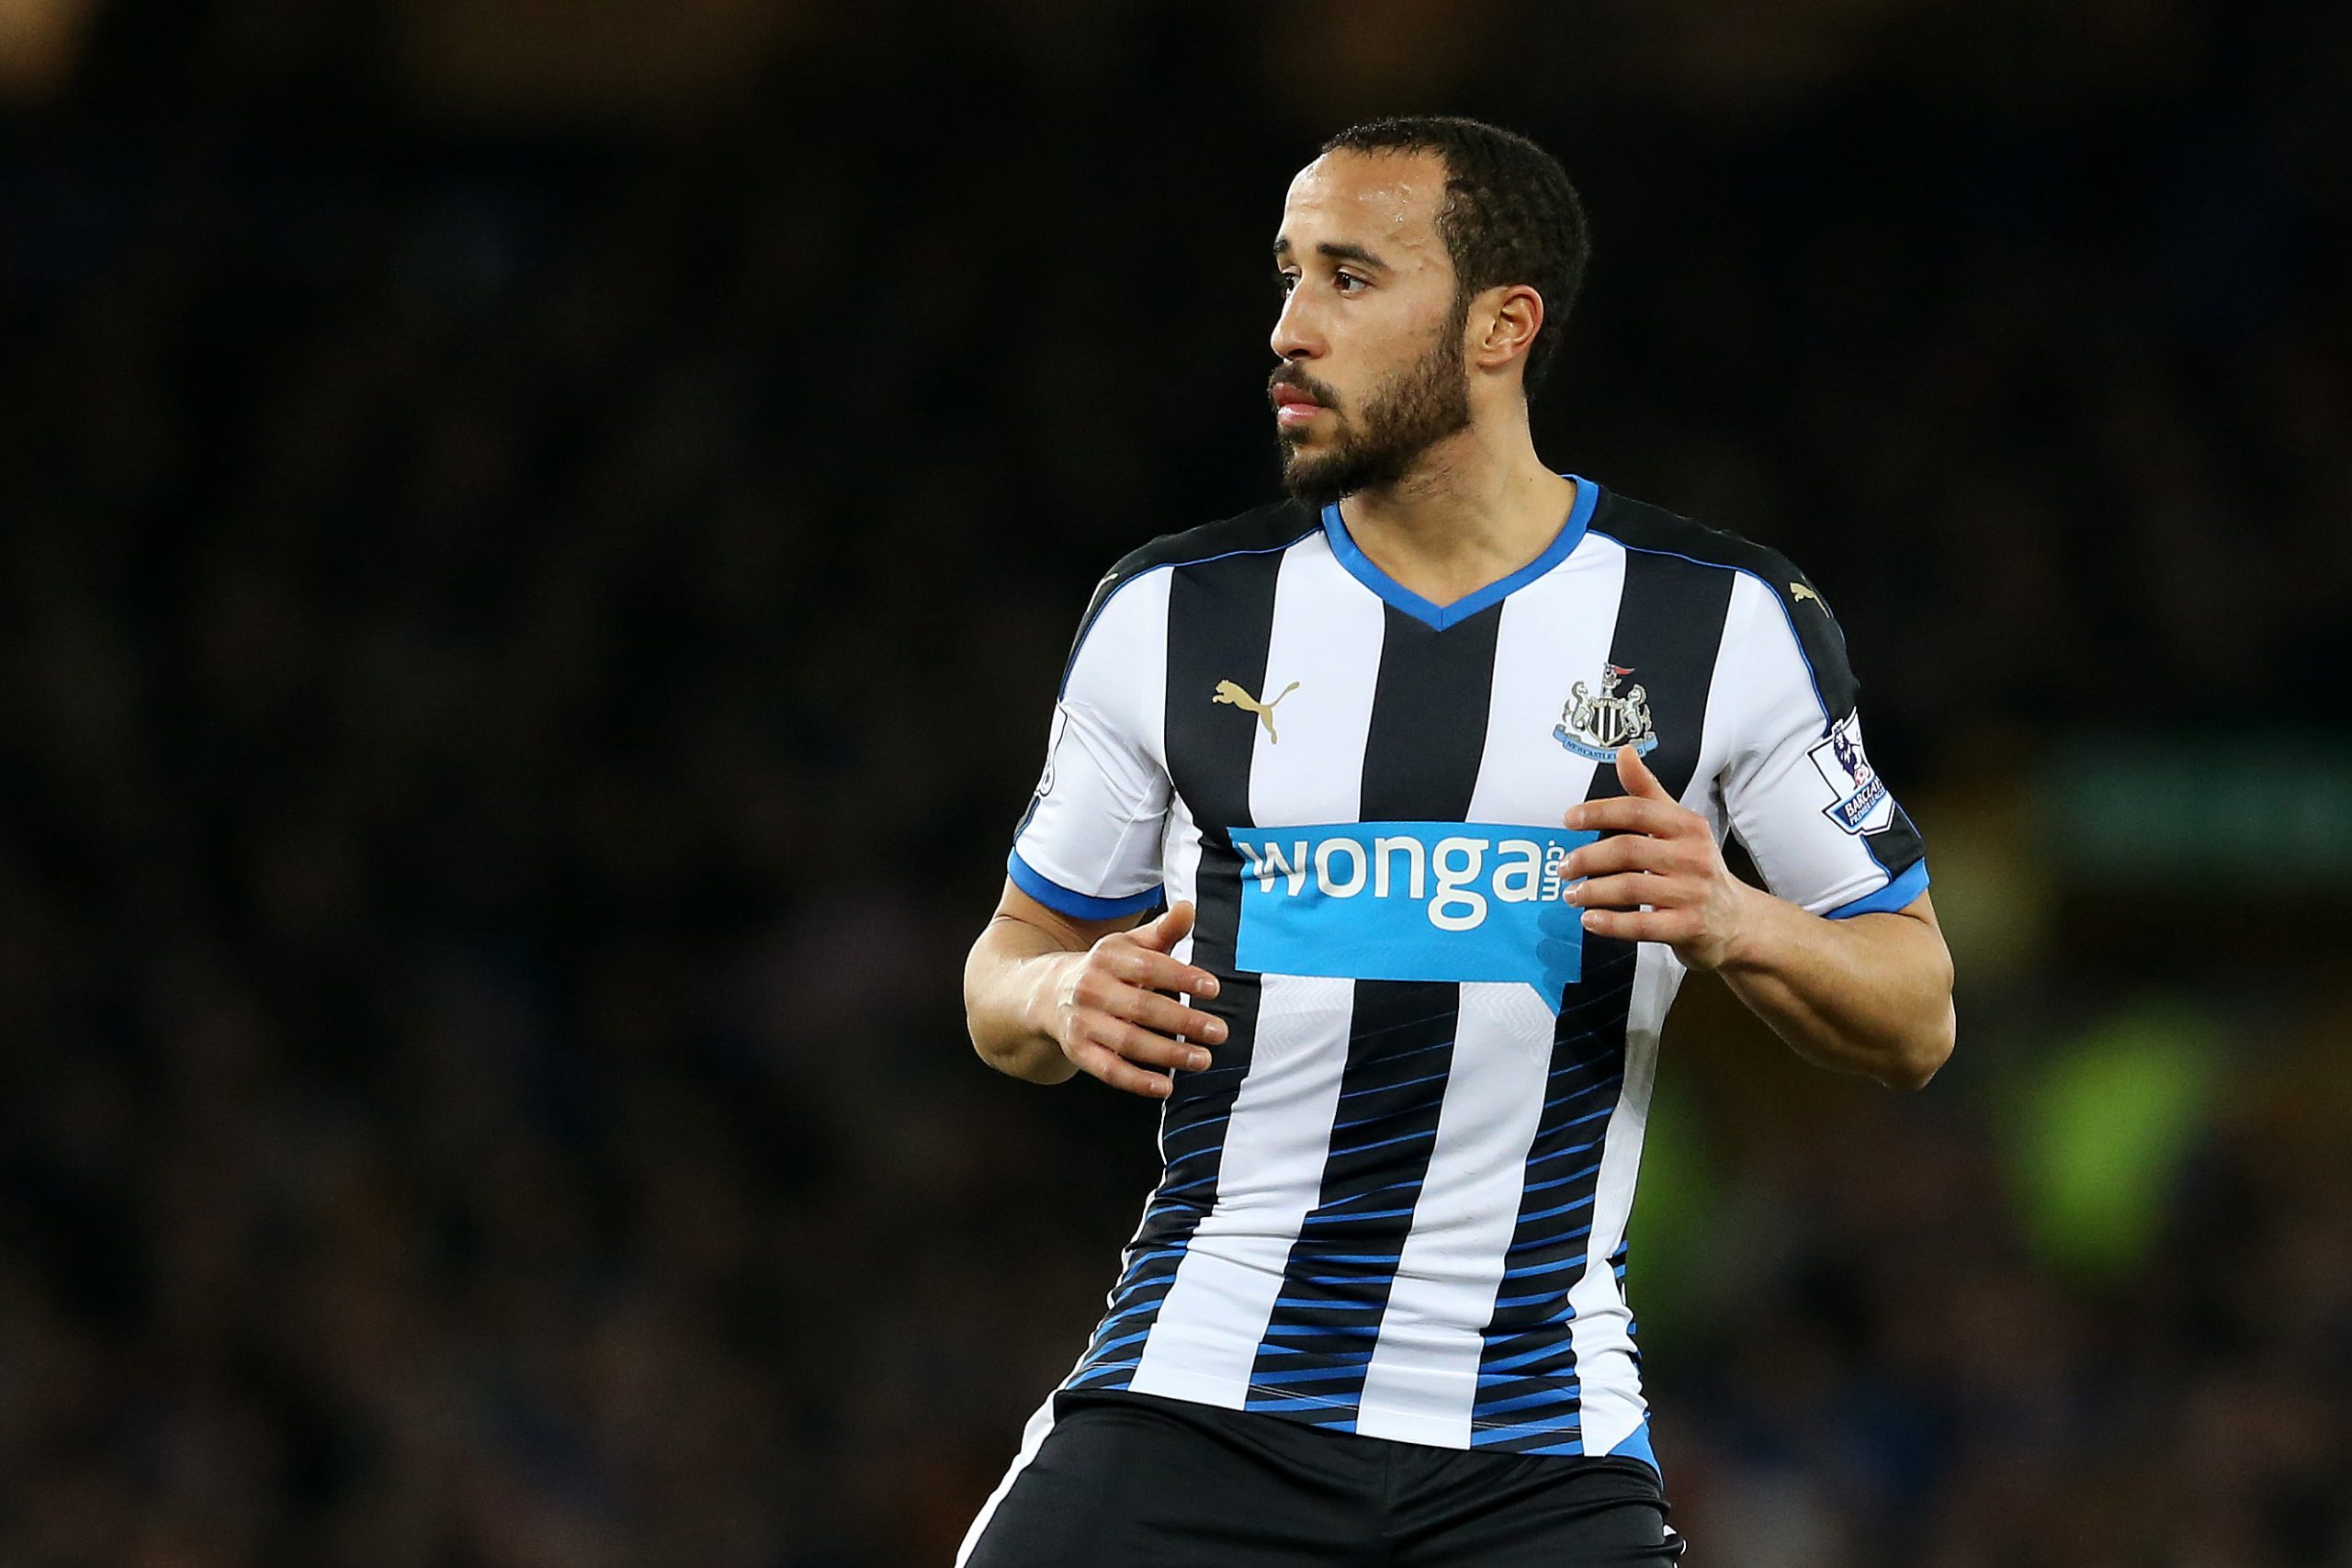 Andros Townsend during the Barclays Premier League match between Everton and Newcastle United played at Goodison Park on February 3rd 2016